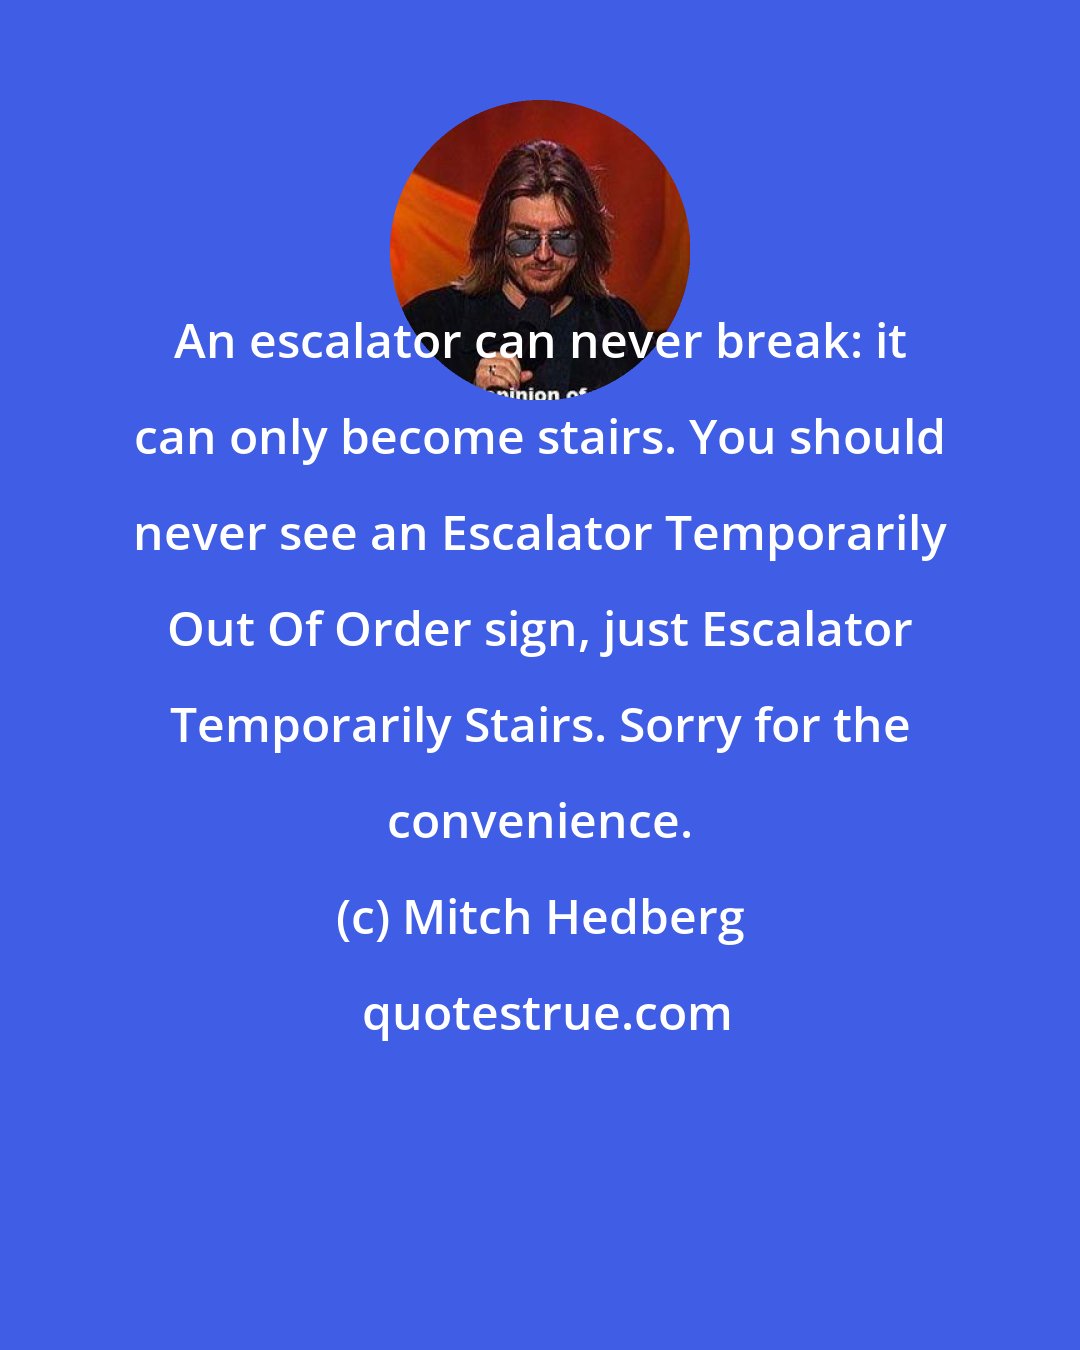 Mitch Hedberg: An escalator can never break: it can only become stairs. You should never see an Escalator Temporarily Out Of Order sign, just Escalator Temporarily Stairs. Sorry for the convenience.